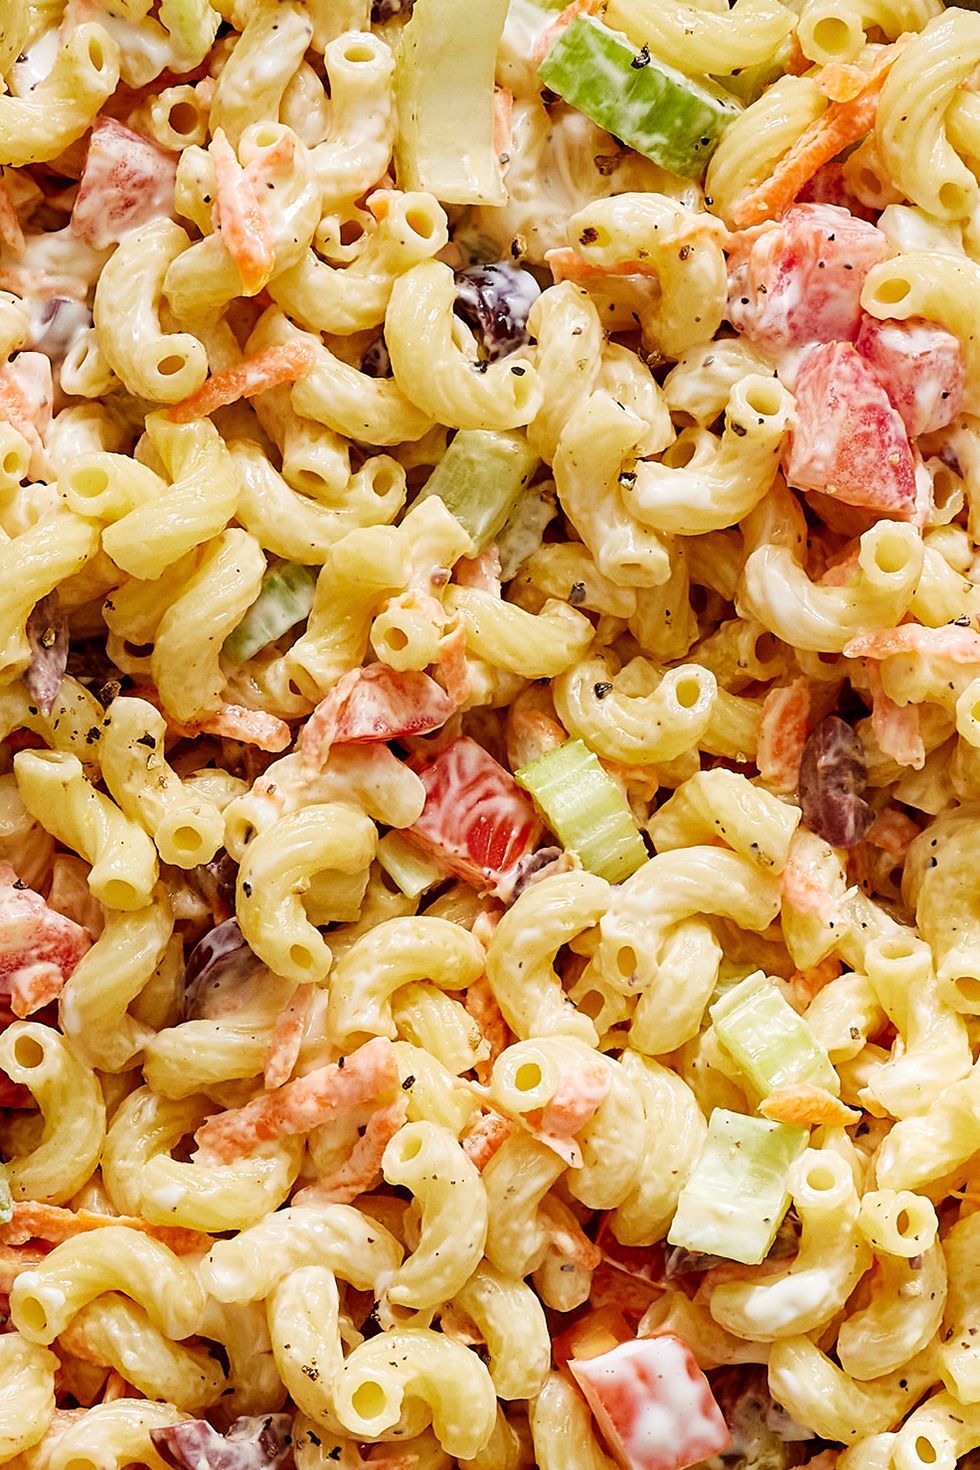 creamy macaroni salad with carrots, celery, and olives